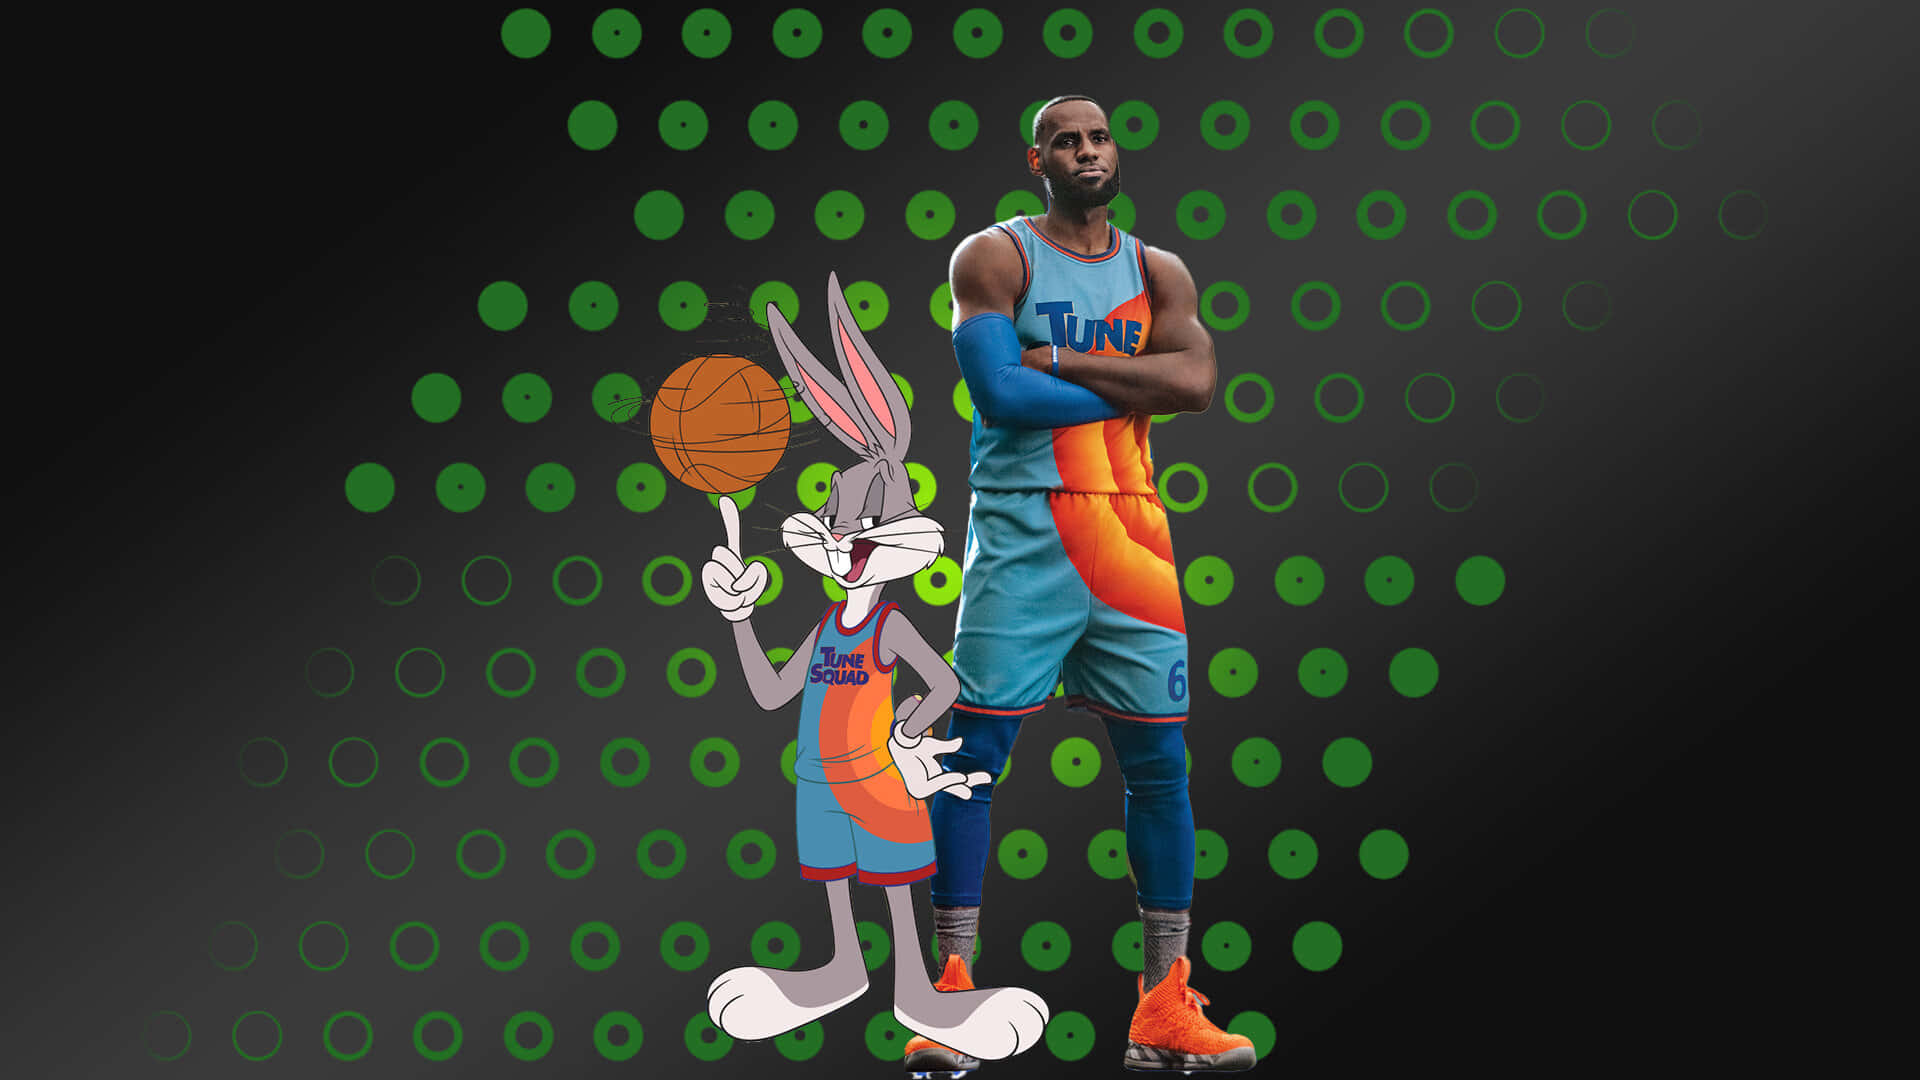 Follow the Tune Squad in their epic intergalactic basketball adventure Wallpaper